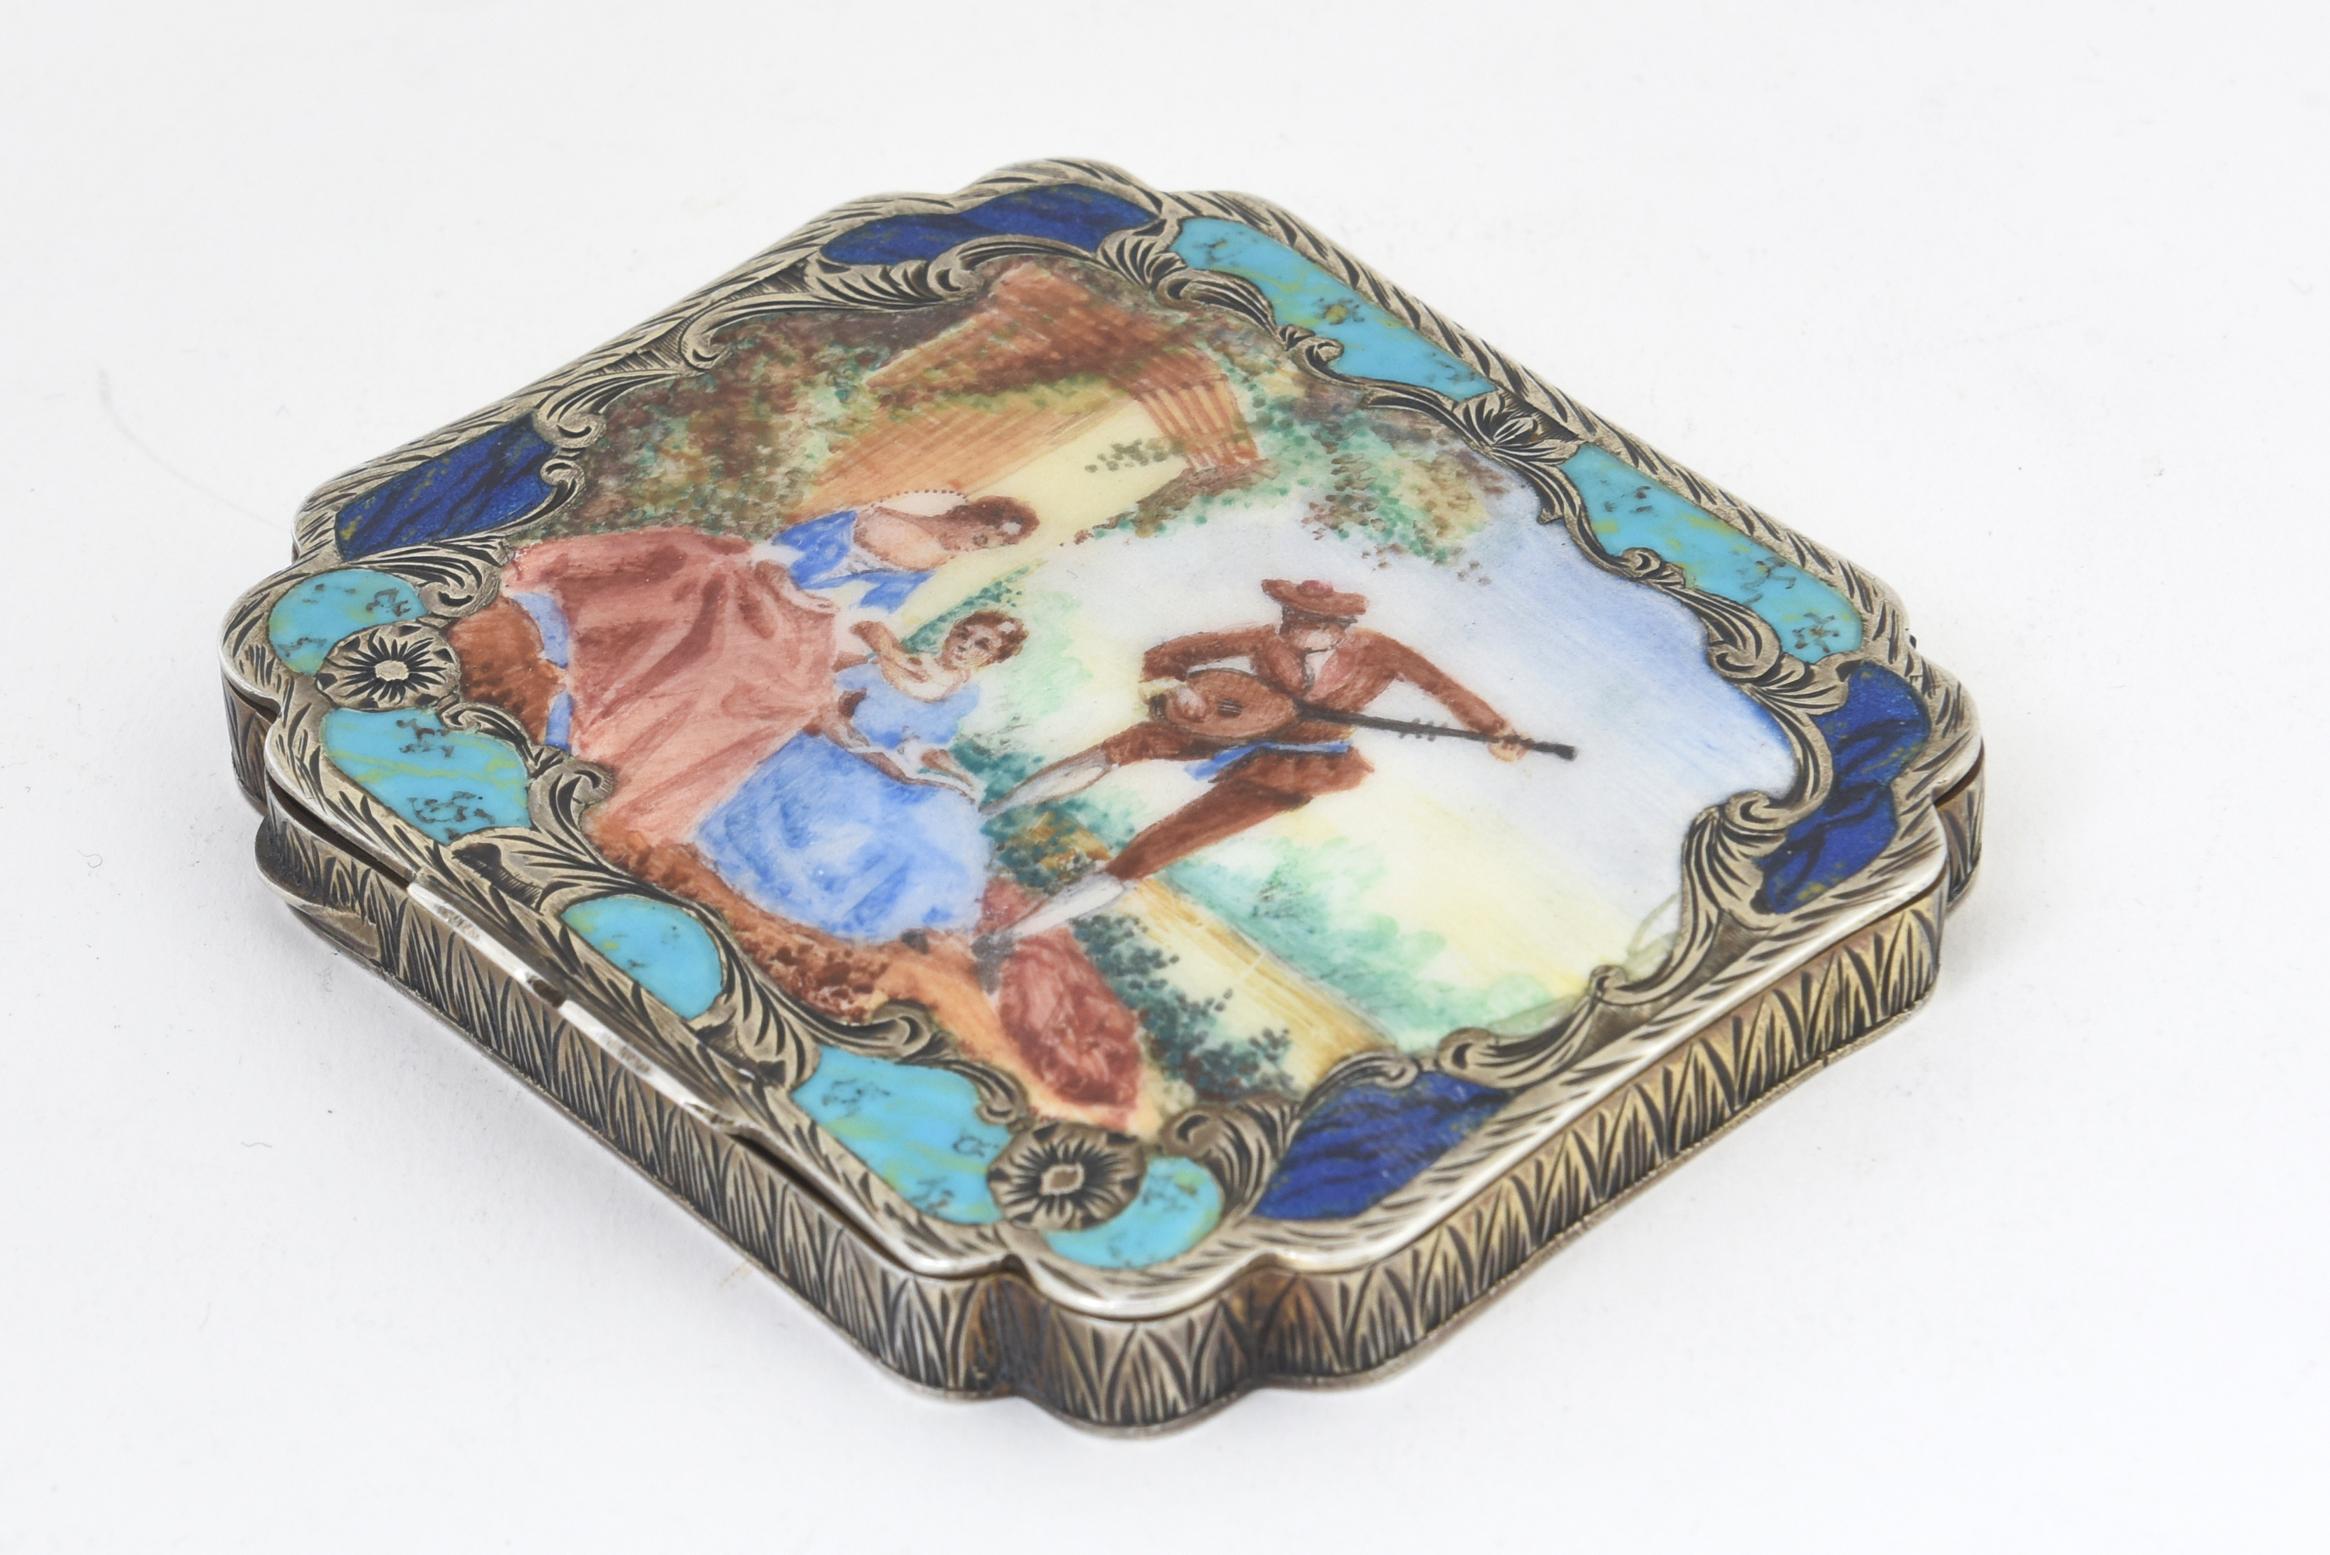 Antique enamel and 800 silver compact. The rectangular top is enclosed by a rocaille scrollwork border with faux-lapis lazuli and faux-turquoise enamel inlay, centering a scene of a musician with two young women in a garden setting. Hand-chased